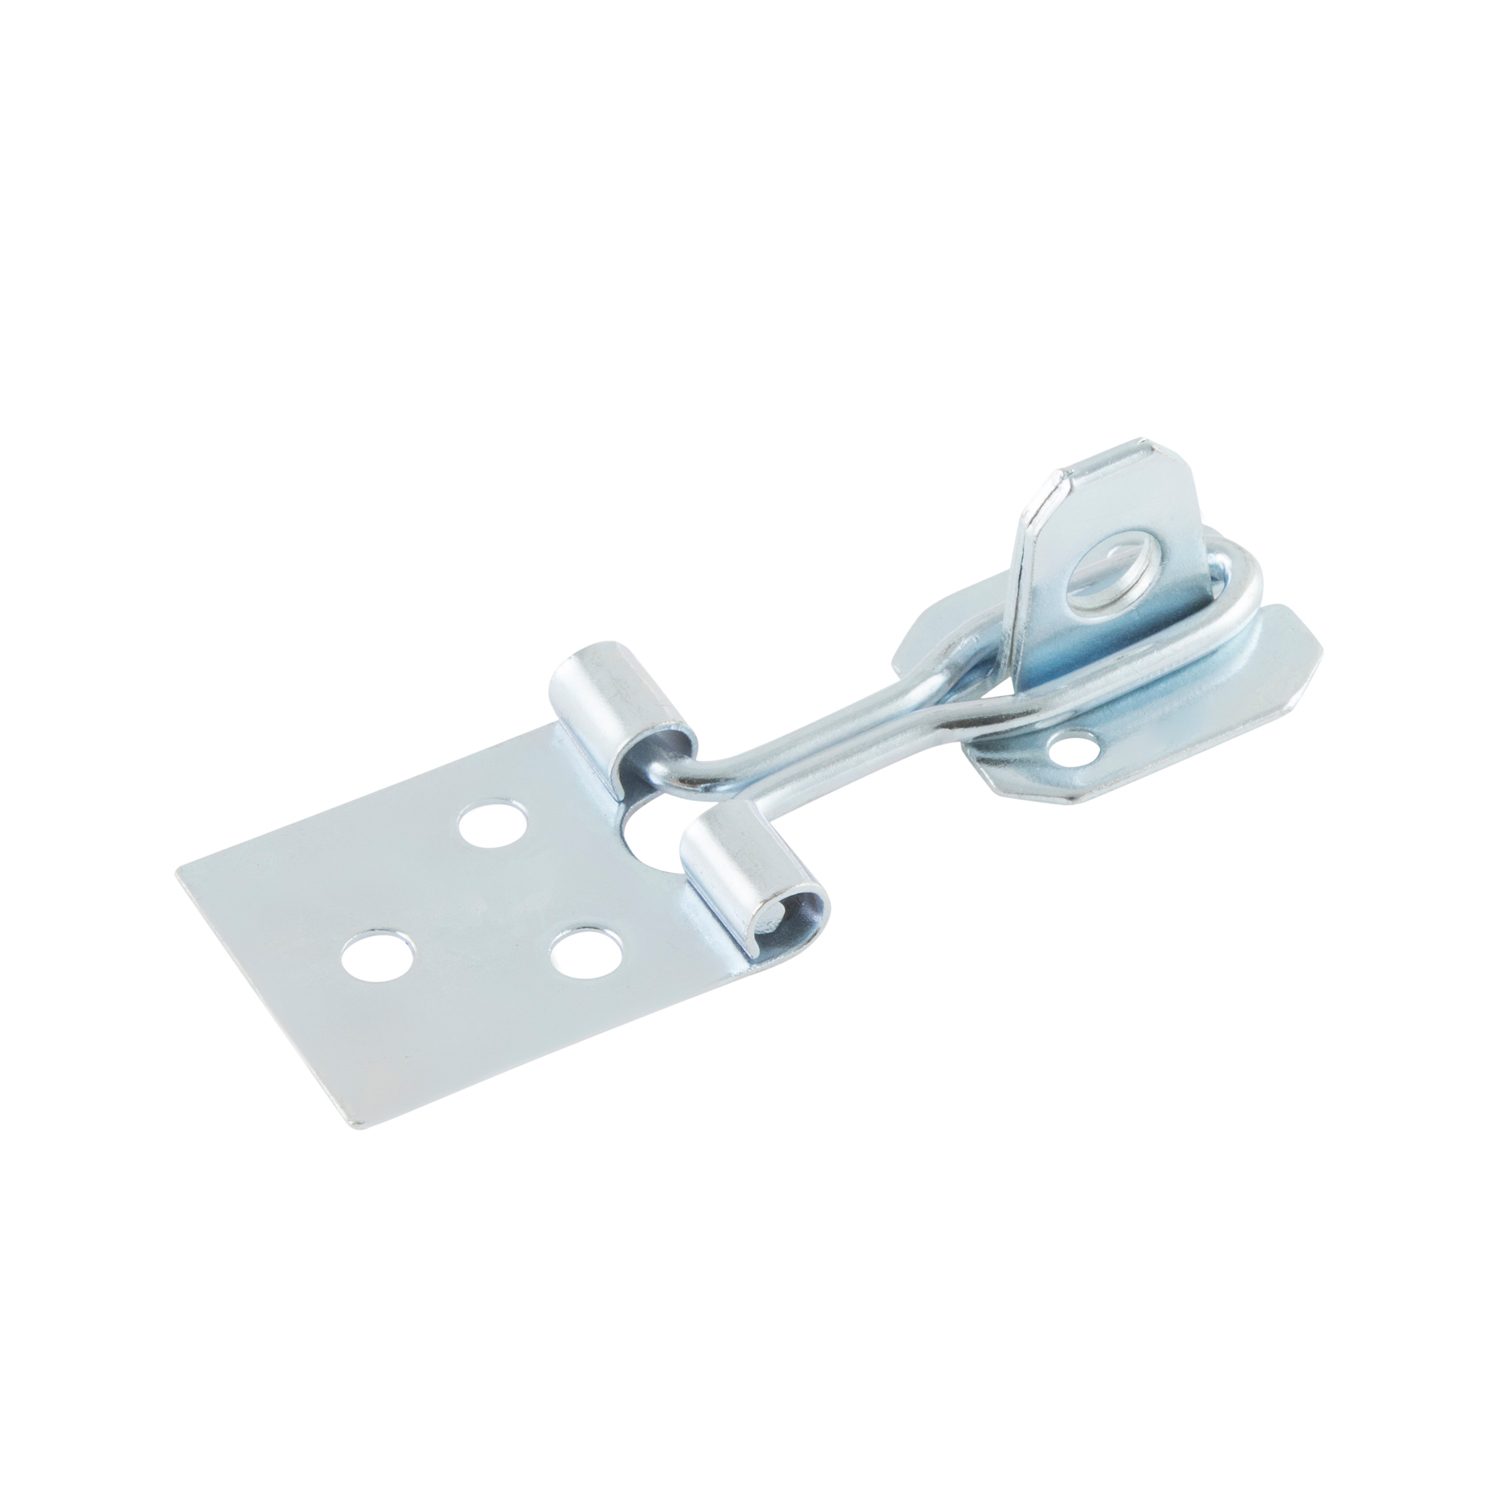 Hiatt 76mm Zinc Plated Silver Wire Hasp and Staple Image 2